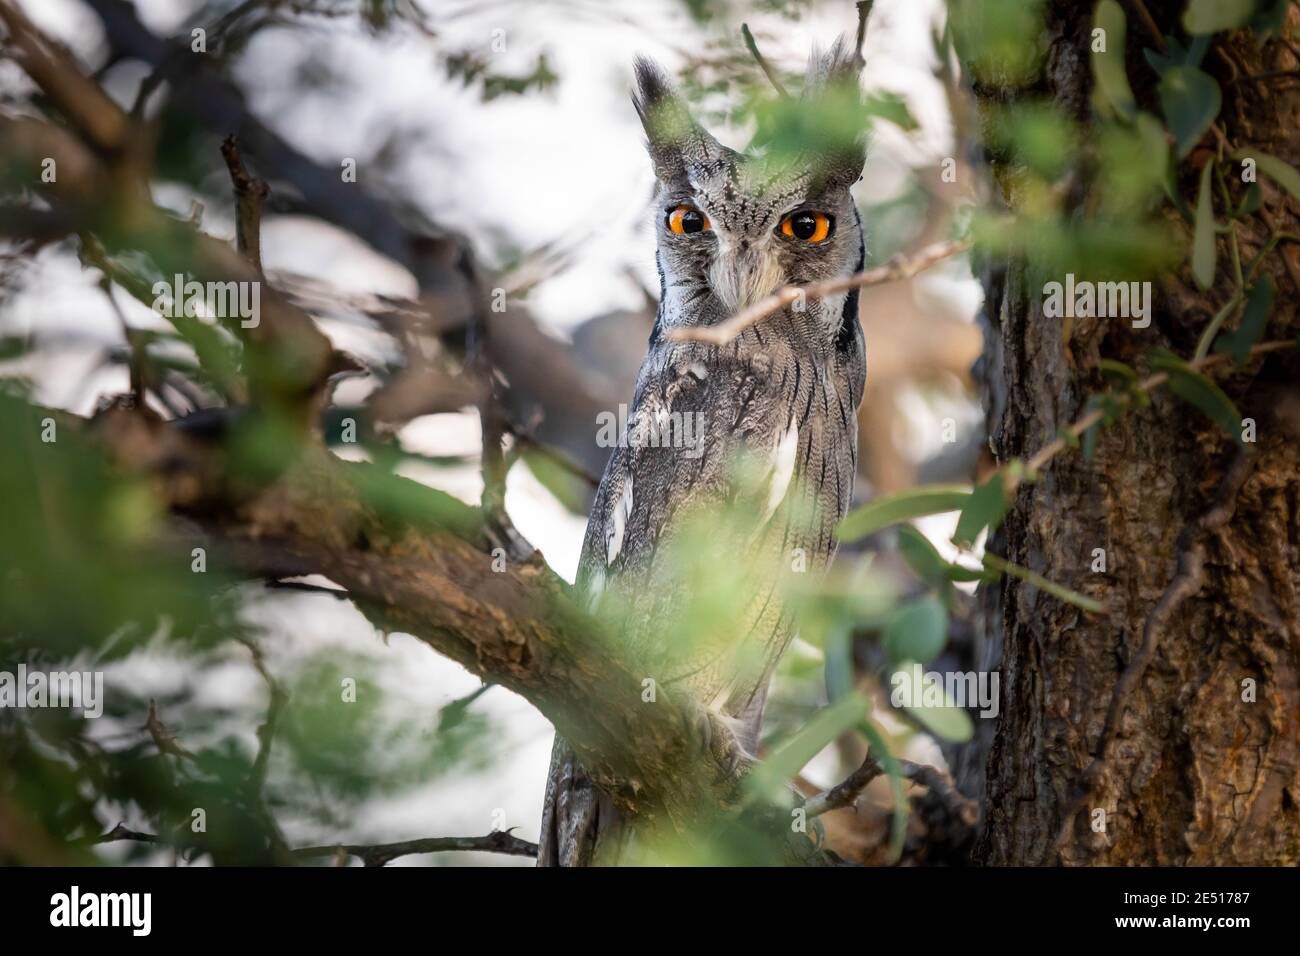 Close up of a grey own perched on a tree partially hidden by leaves and staring back at the camera with large orange eyes Stock Photo